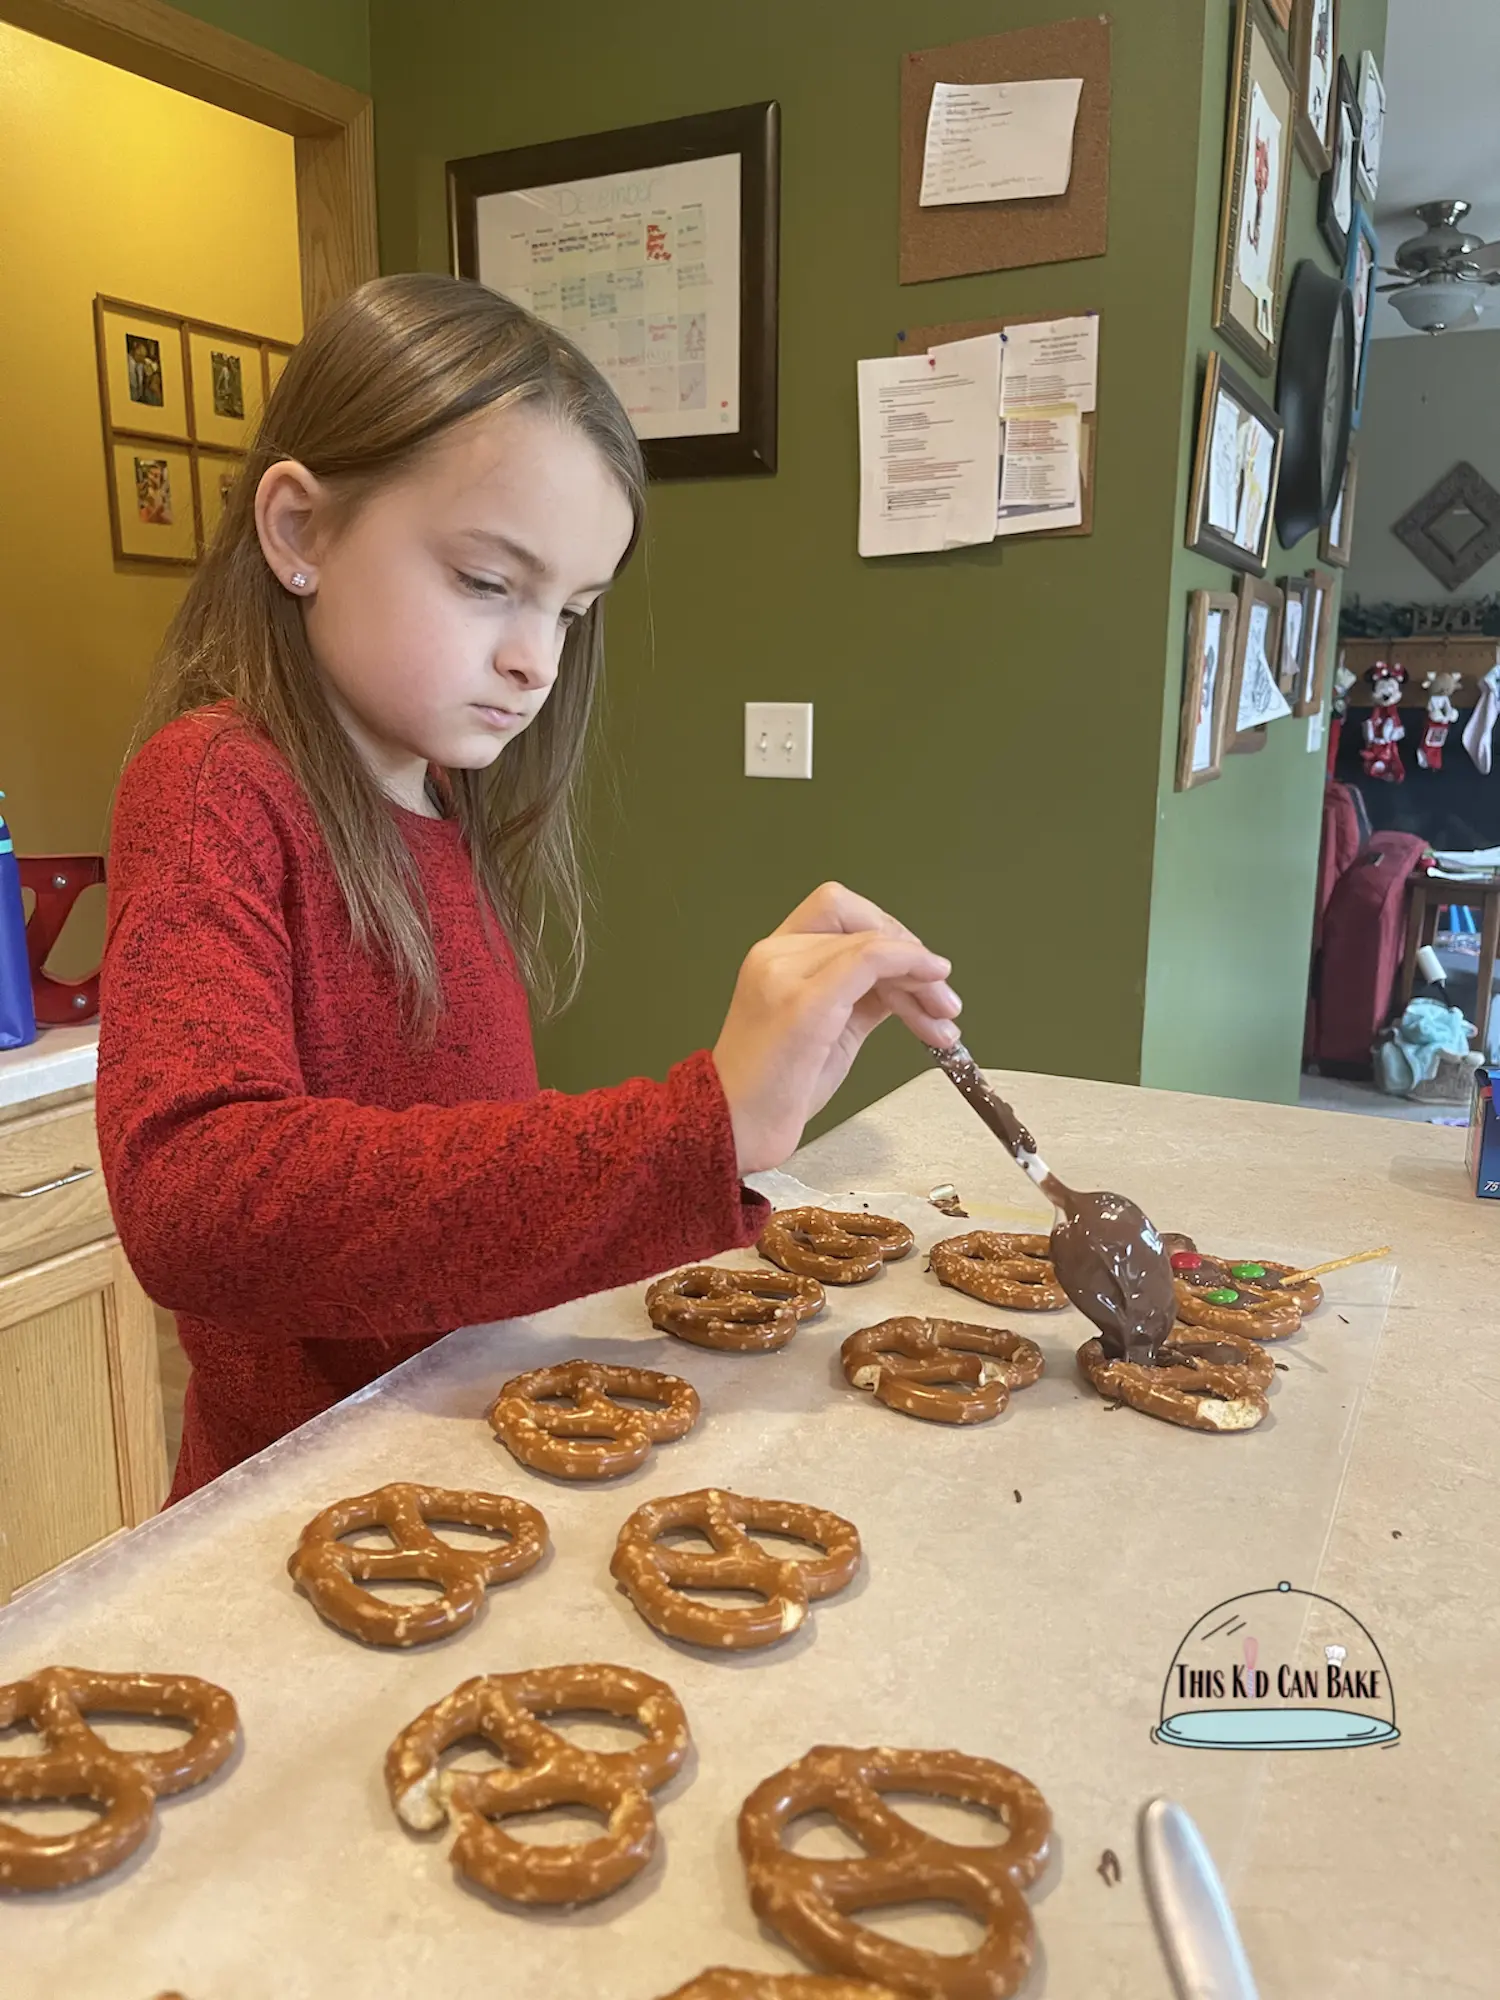 A picture of a child filling pretzels with chocolate to make reindeer chocolate pretzels for Christmas baking.